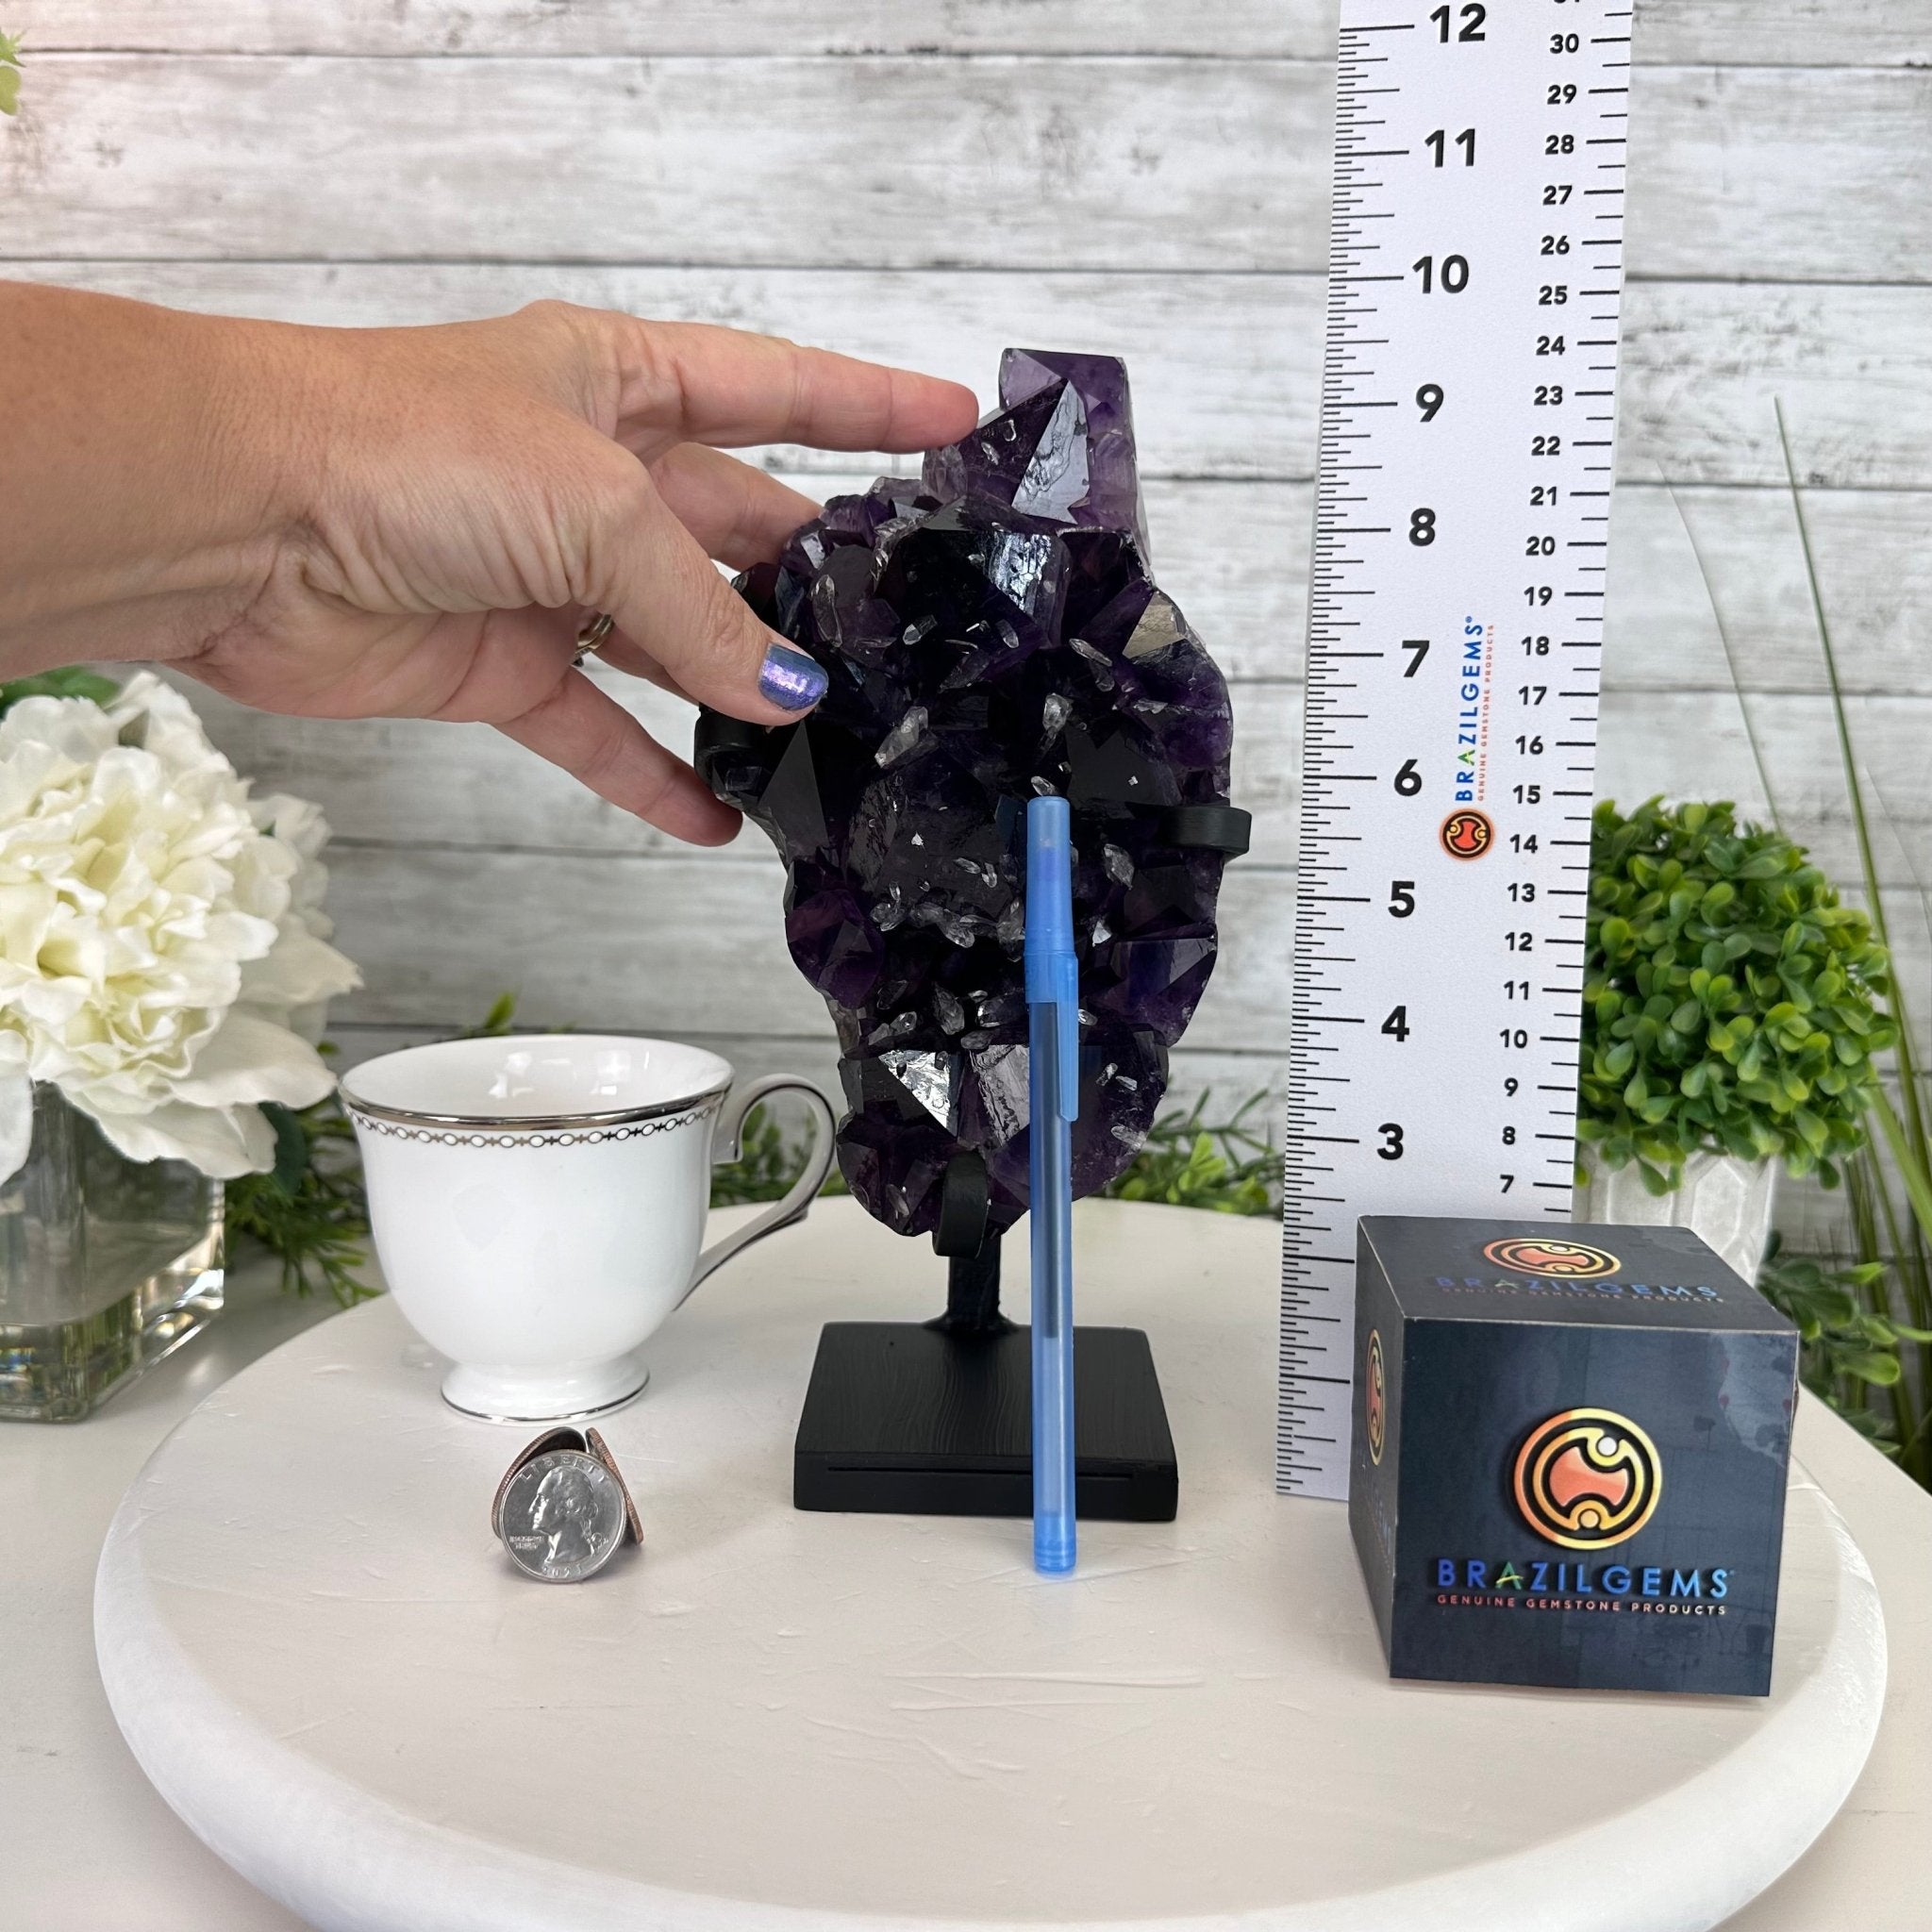 Super Quality Amethyst Cluster on a Metal Stand, 5.4 lbs & 9.5" Tall #5491-0153 - Brazil GemsBrazil GemsSuper Quality Amethyst Cluster on a Metal Stand, 5.4 lbs & 9.5" Tall #5491-0153Clusters on Fixed Bases5491-0153